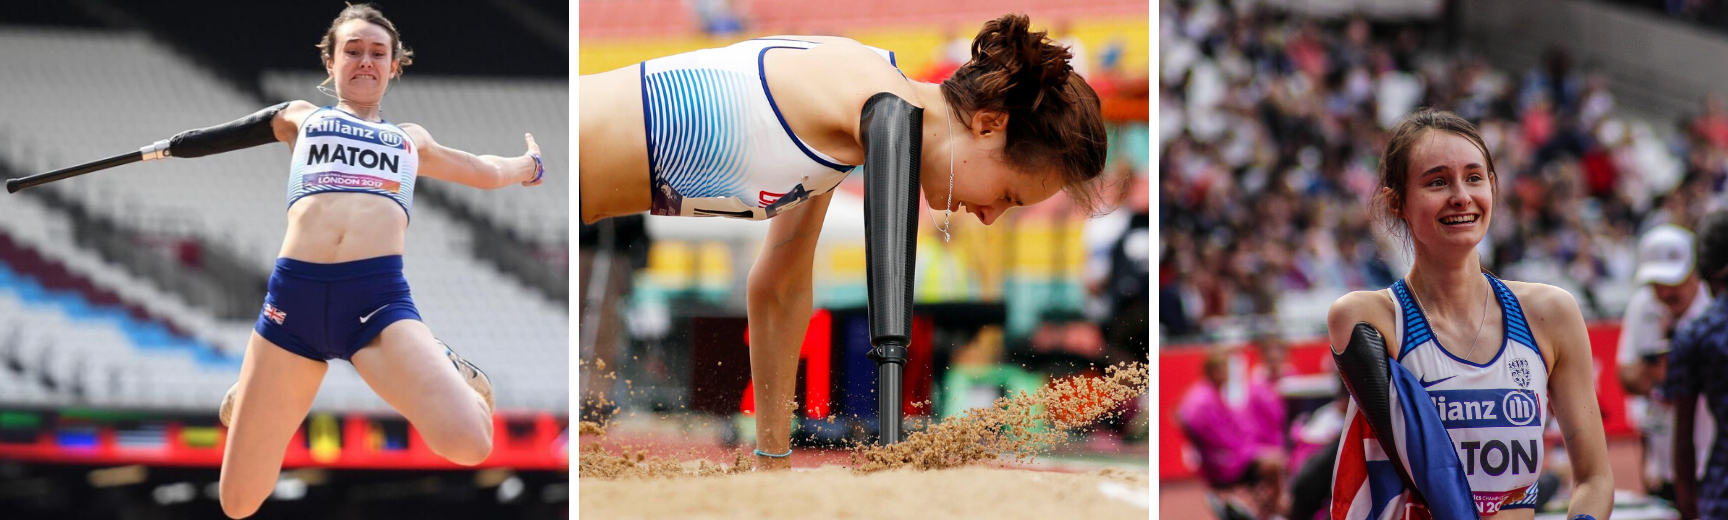 Two images of Polly competing in long jump and an image of her with a Union Jack flag